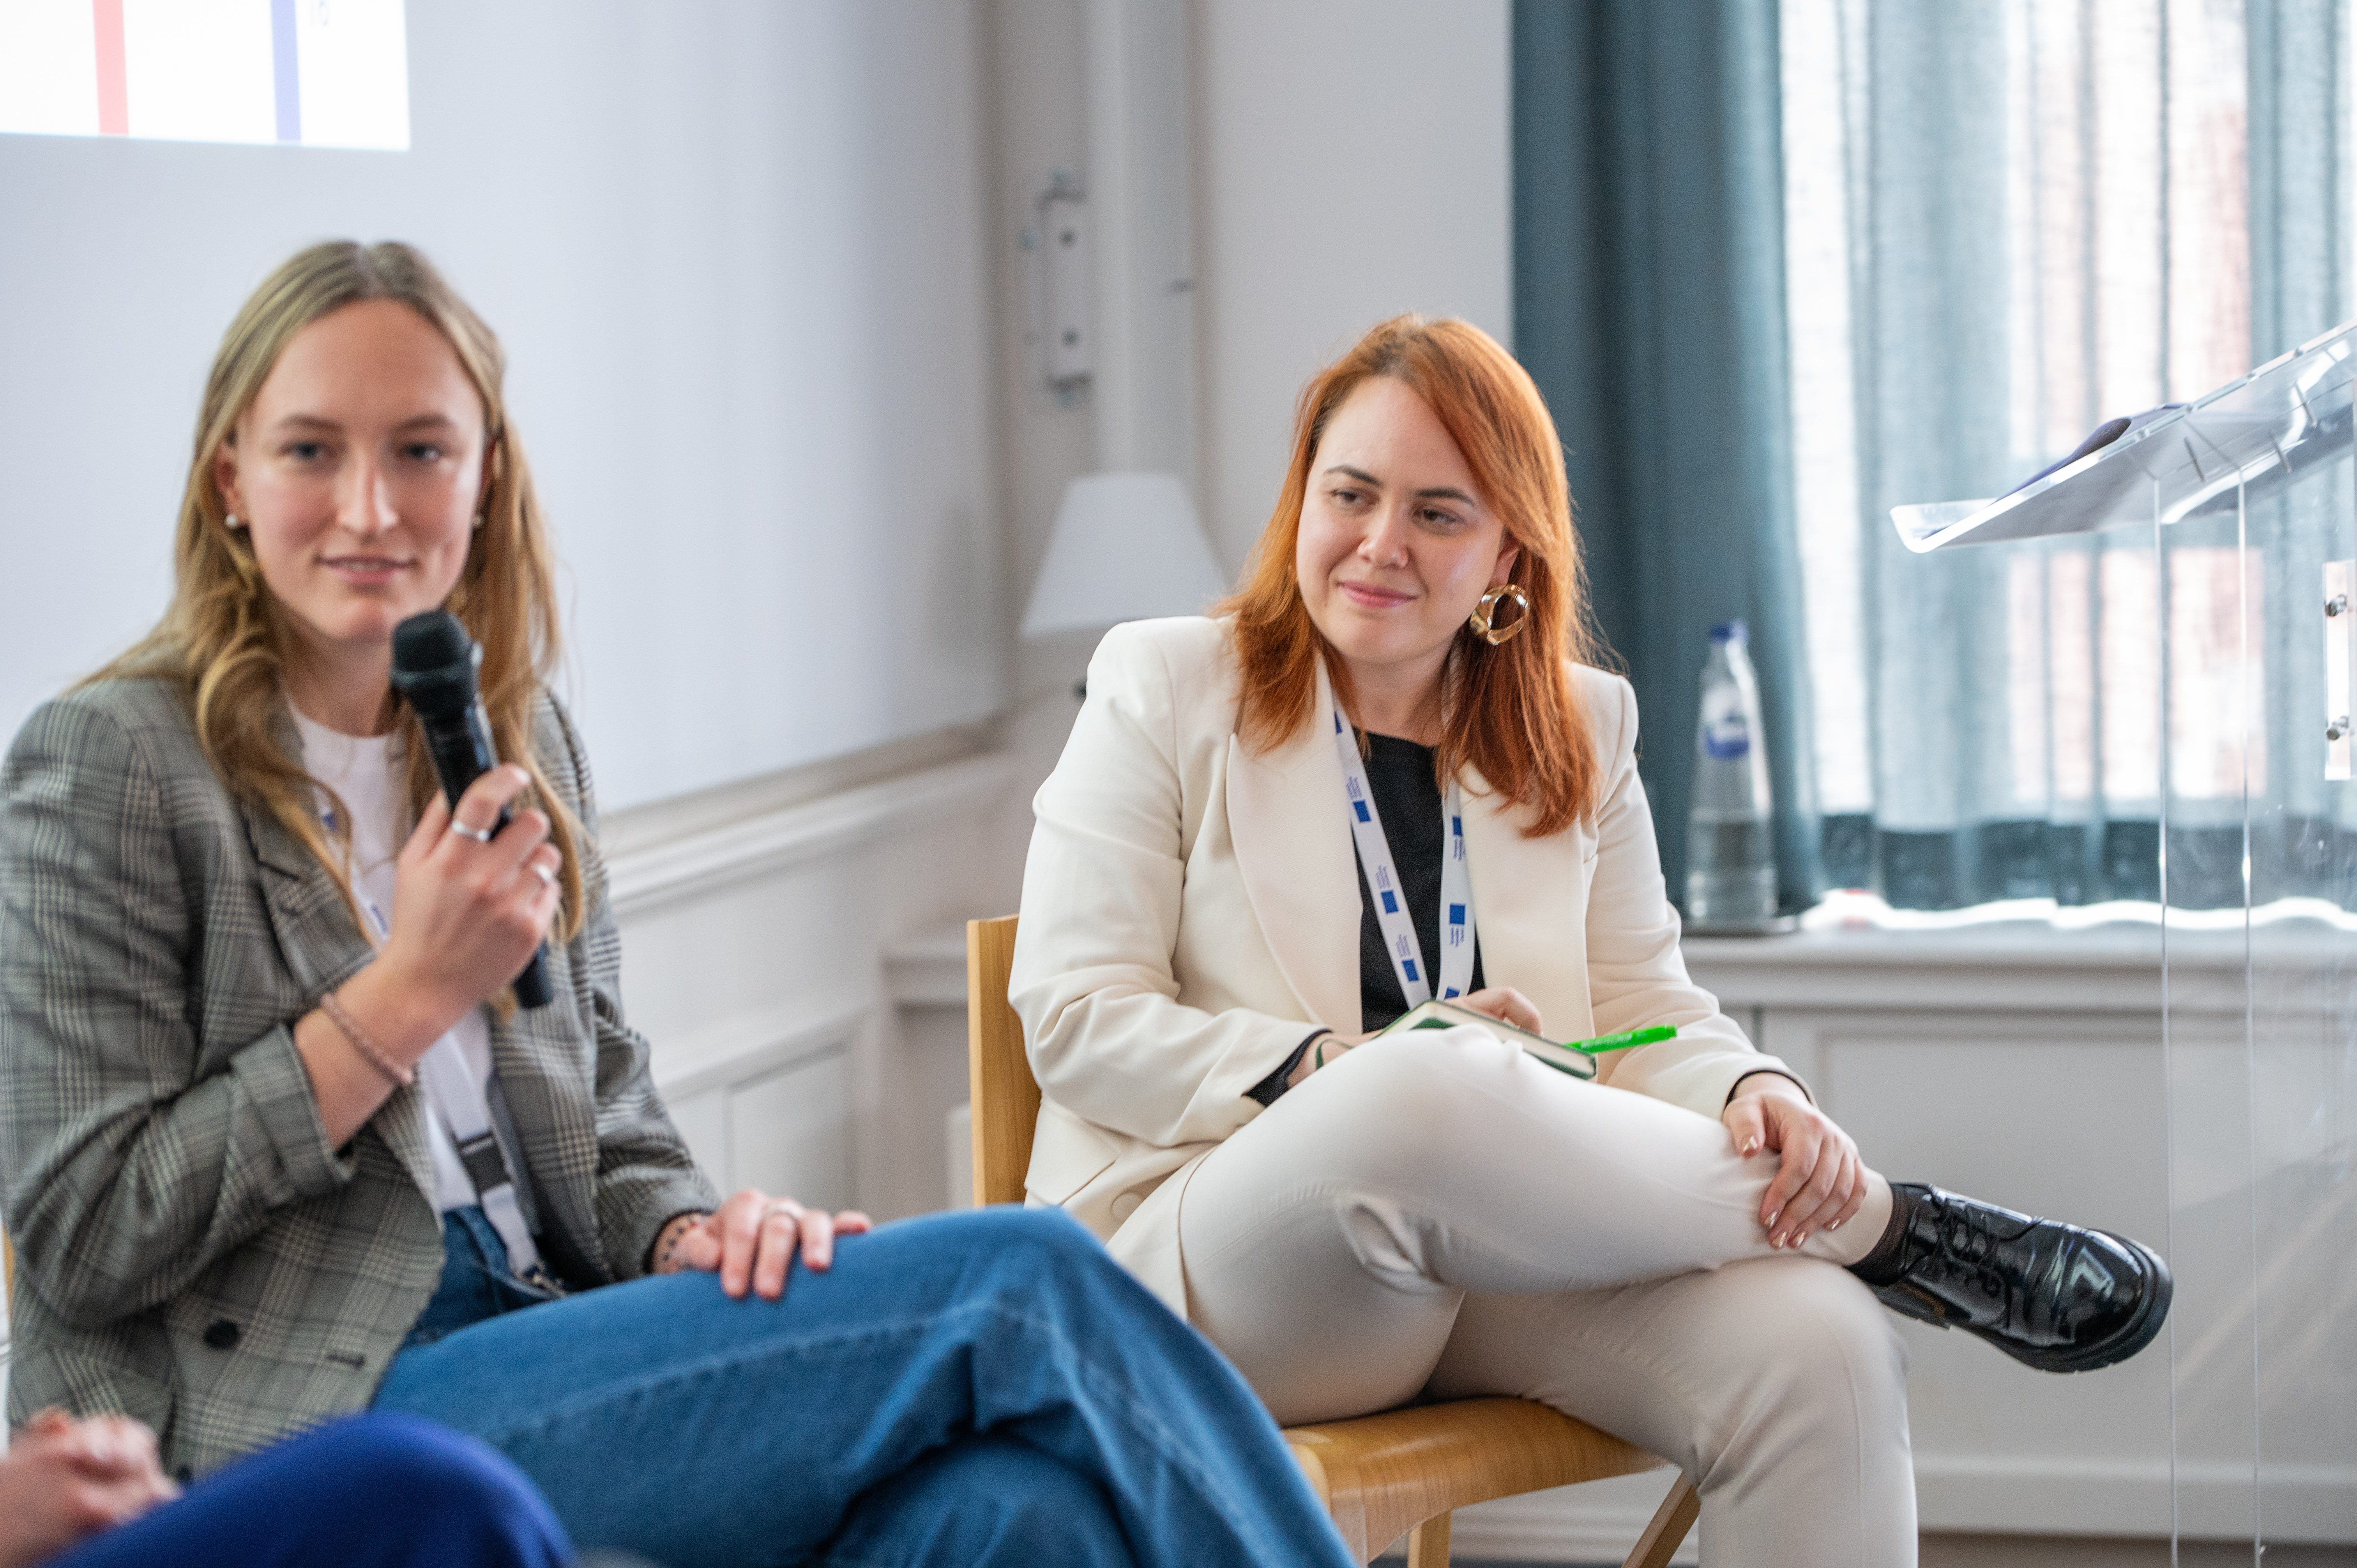 Sofia Karagianni, Senior Policy Officer at Cleantech for Europe, sitting on the right side of the image